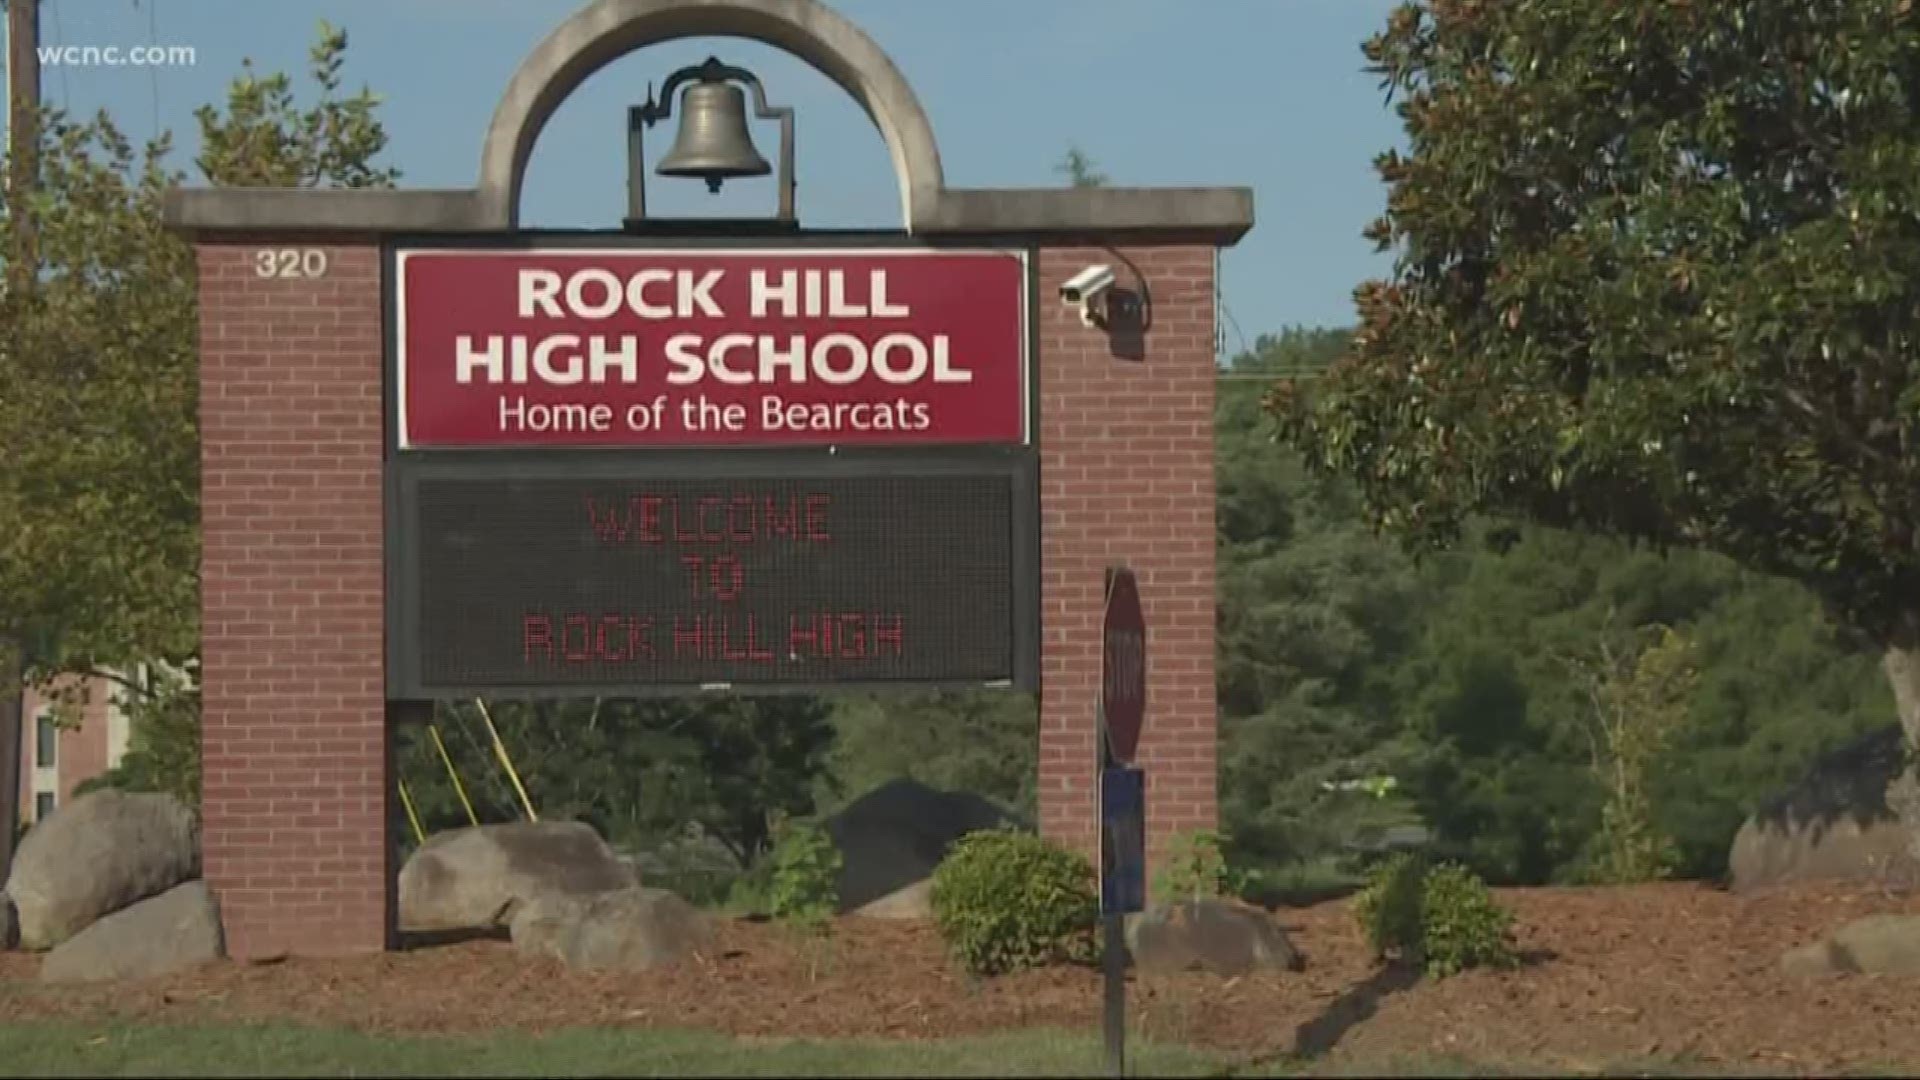 Rock Hill Schools are going to look a little different this school year after big changes over the summer.